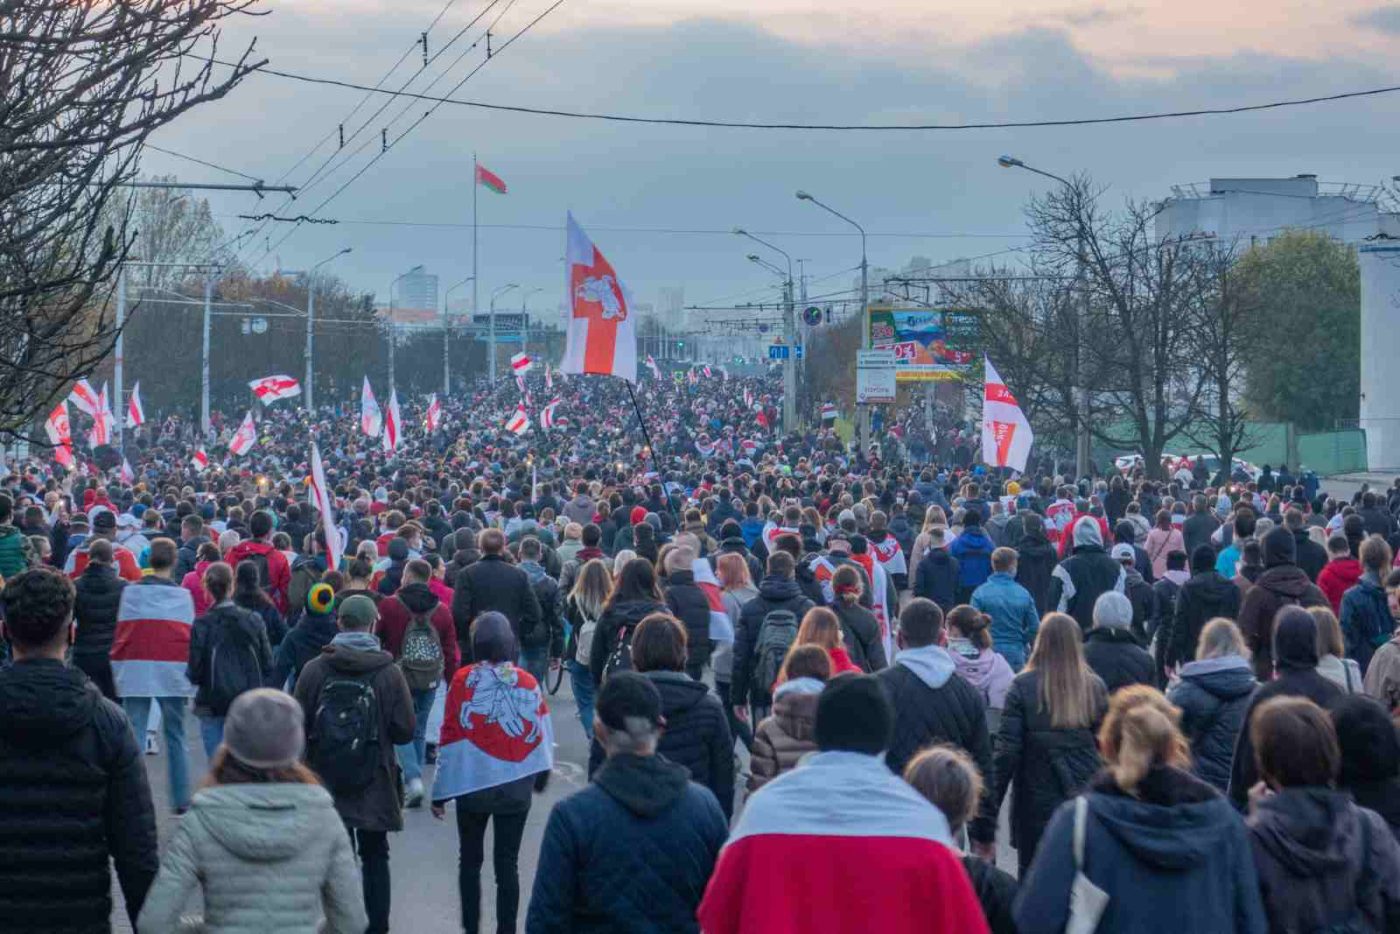 Photo: Protest rally against Lukashenko, 25 October 2020. Minsk, Belarus. Credit: Wikimedia Commons